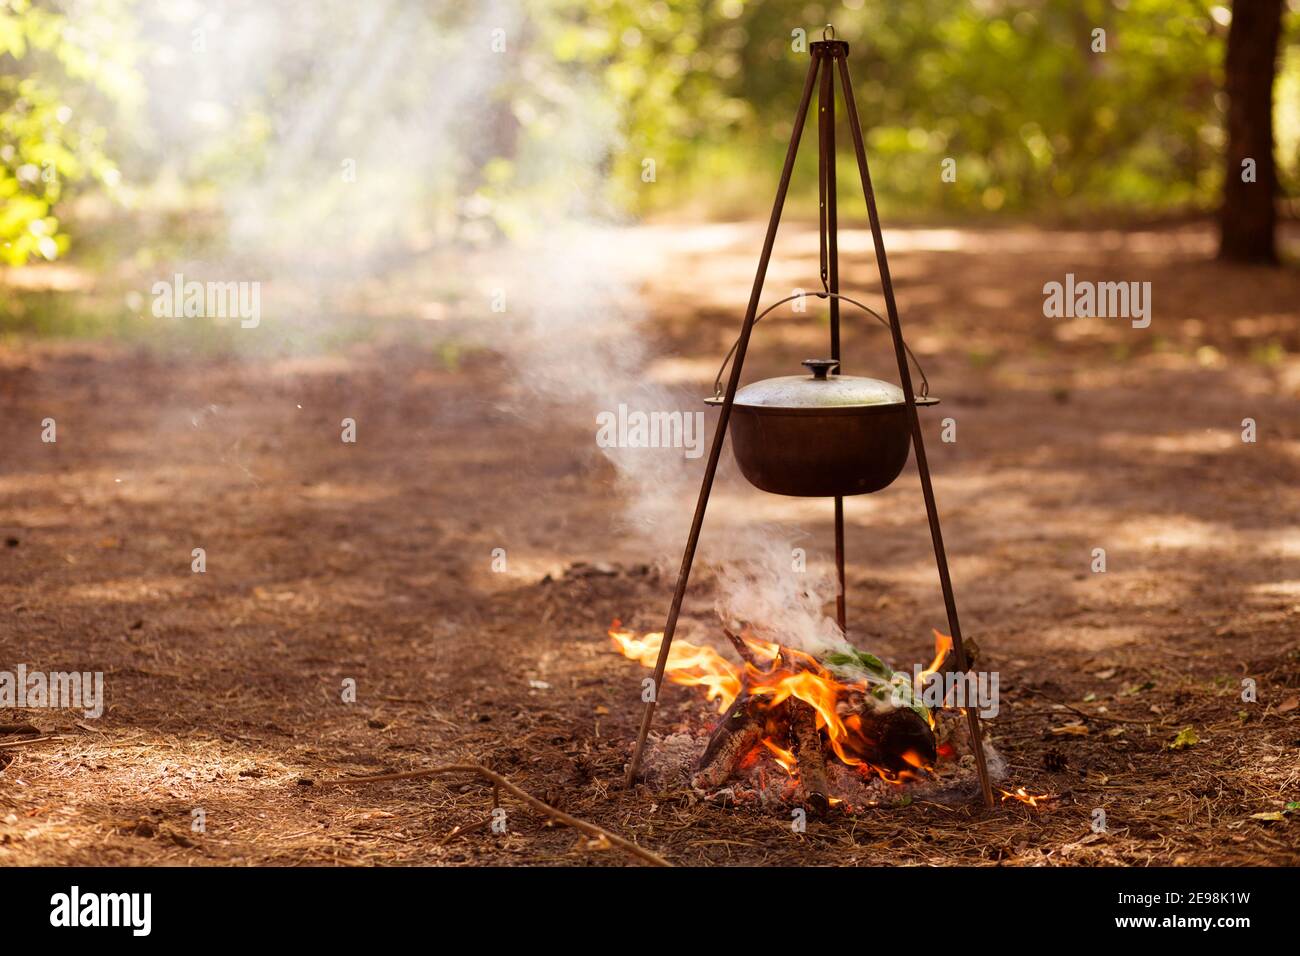 Food is cooked on campfire in forest. Traveling, tourism, picnic cooking in cauldron, fire and smoke. Stock Photo